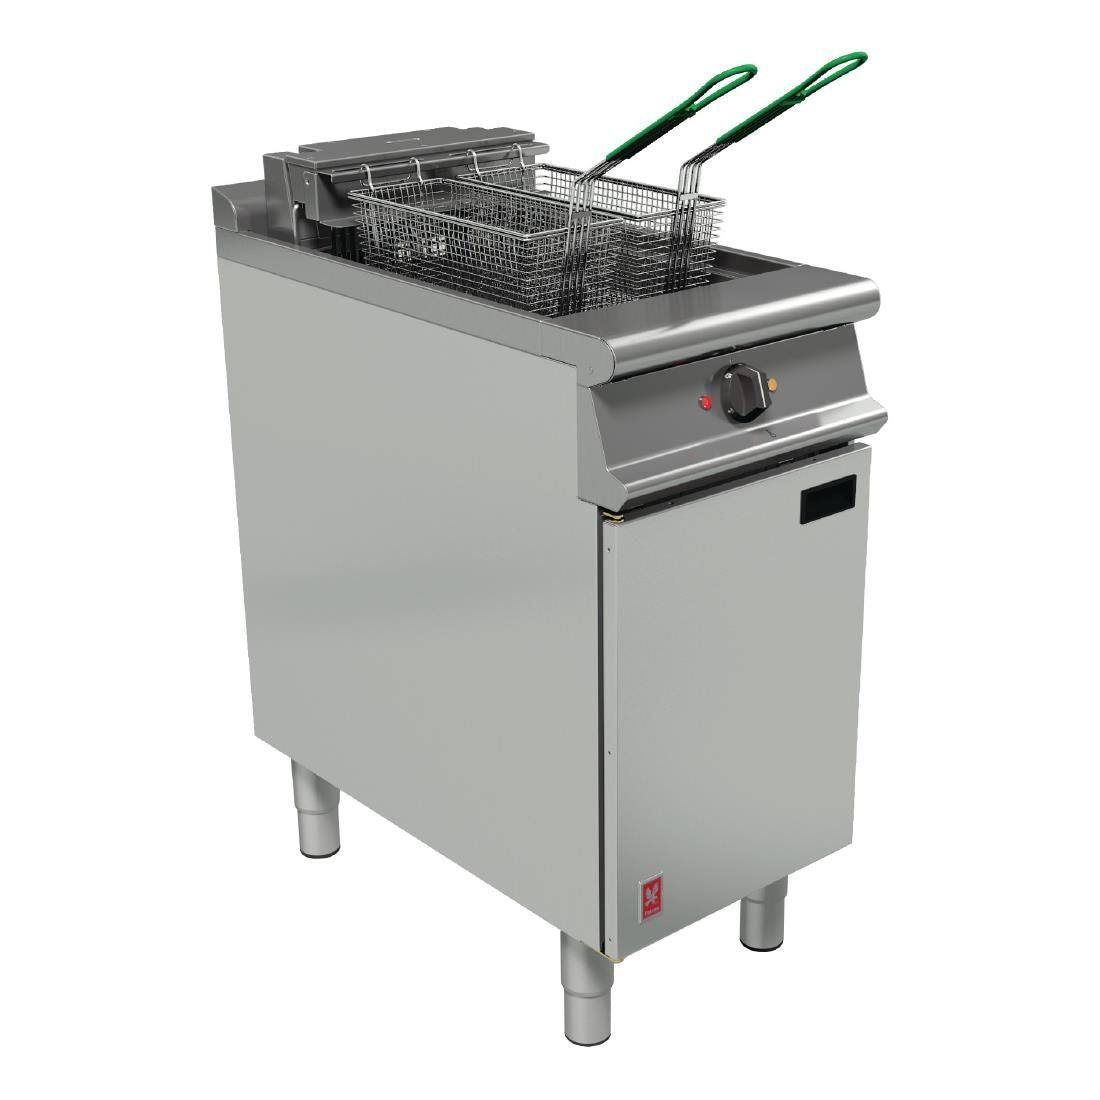 Falcon Dominator Single Tank Twin Basket Free Standing Electric Filtration Fryer E3840F JD Catering Equipment Solutions Ltd